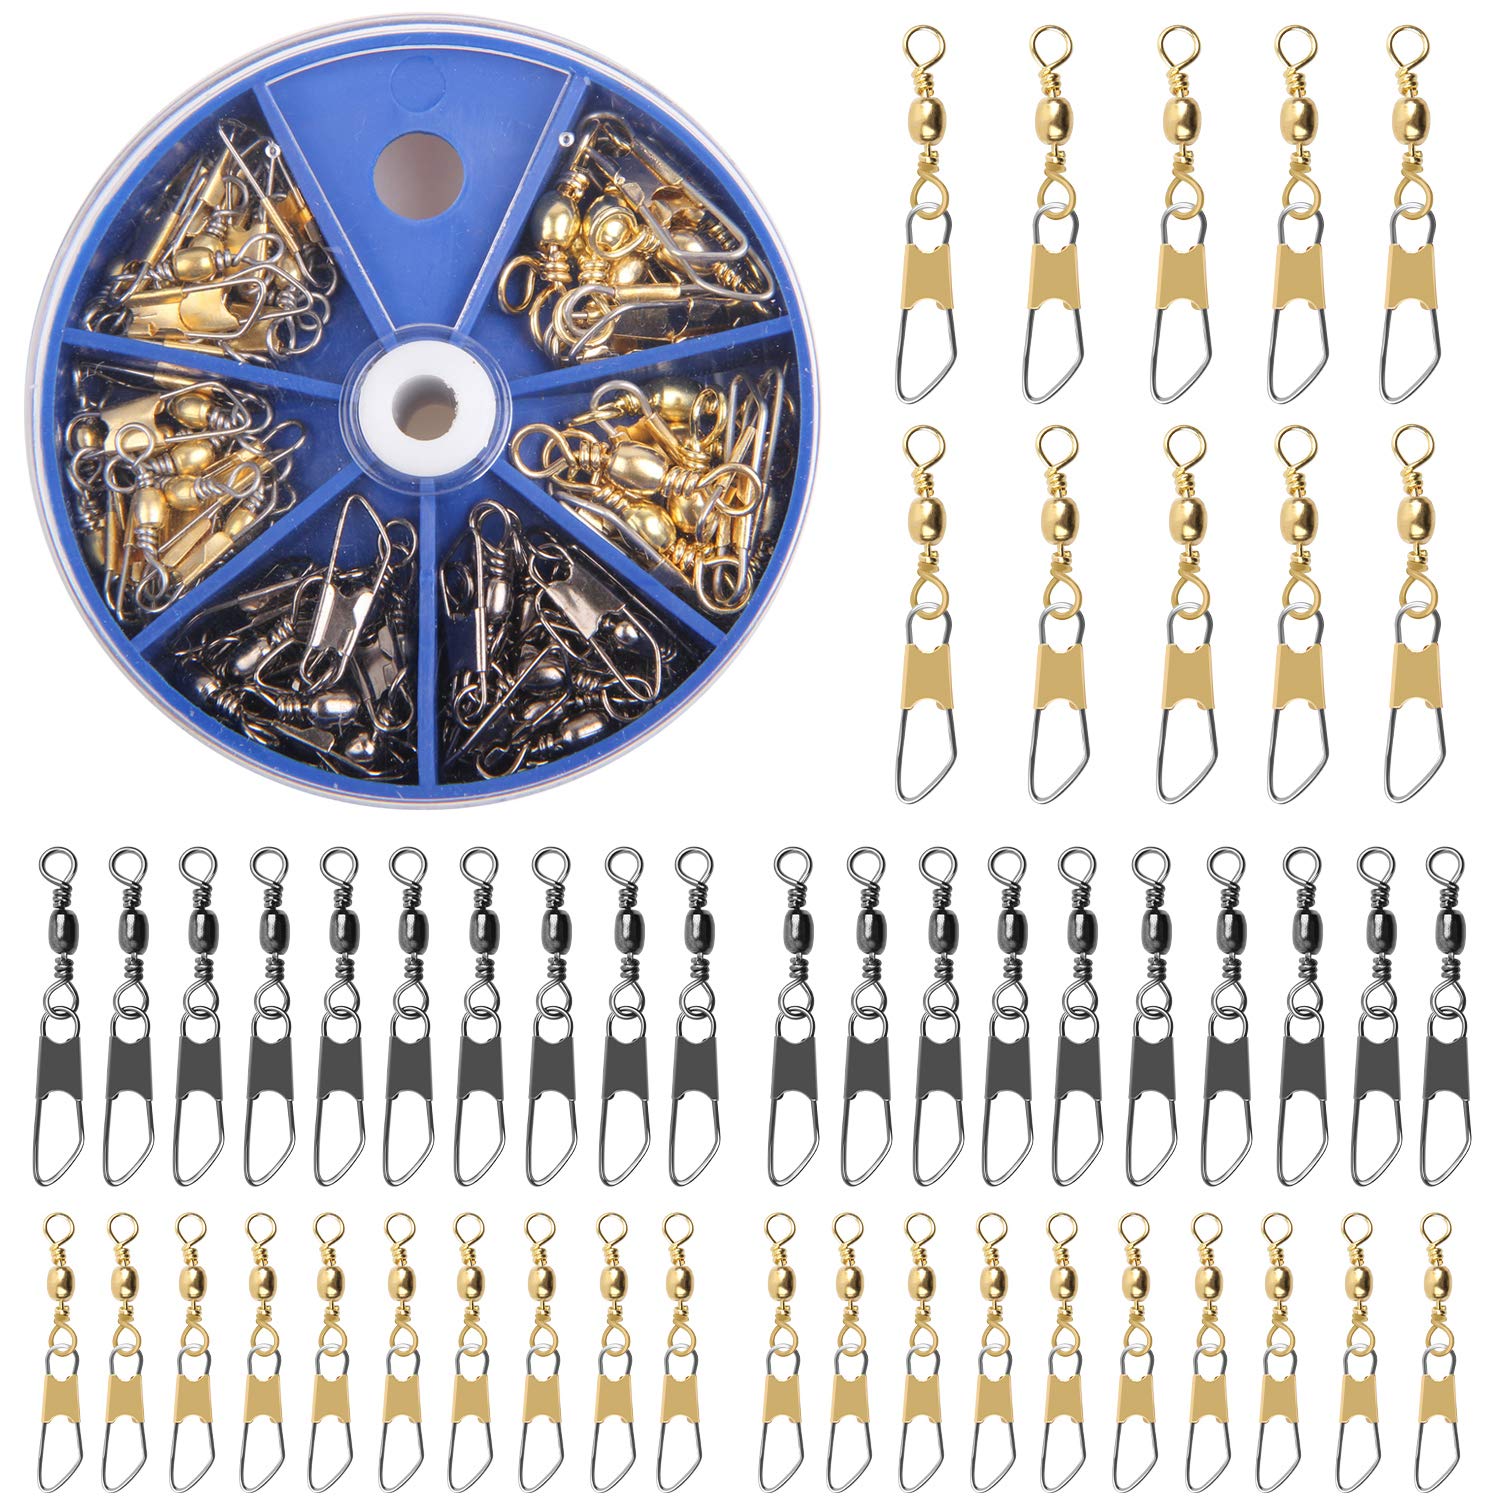 AGOOL Barrel Swivel Snap Kit - 50pcs Barrel Swivels with Safety Snaps High  Strength Fishing Quick Connect